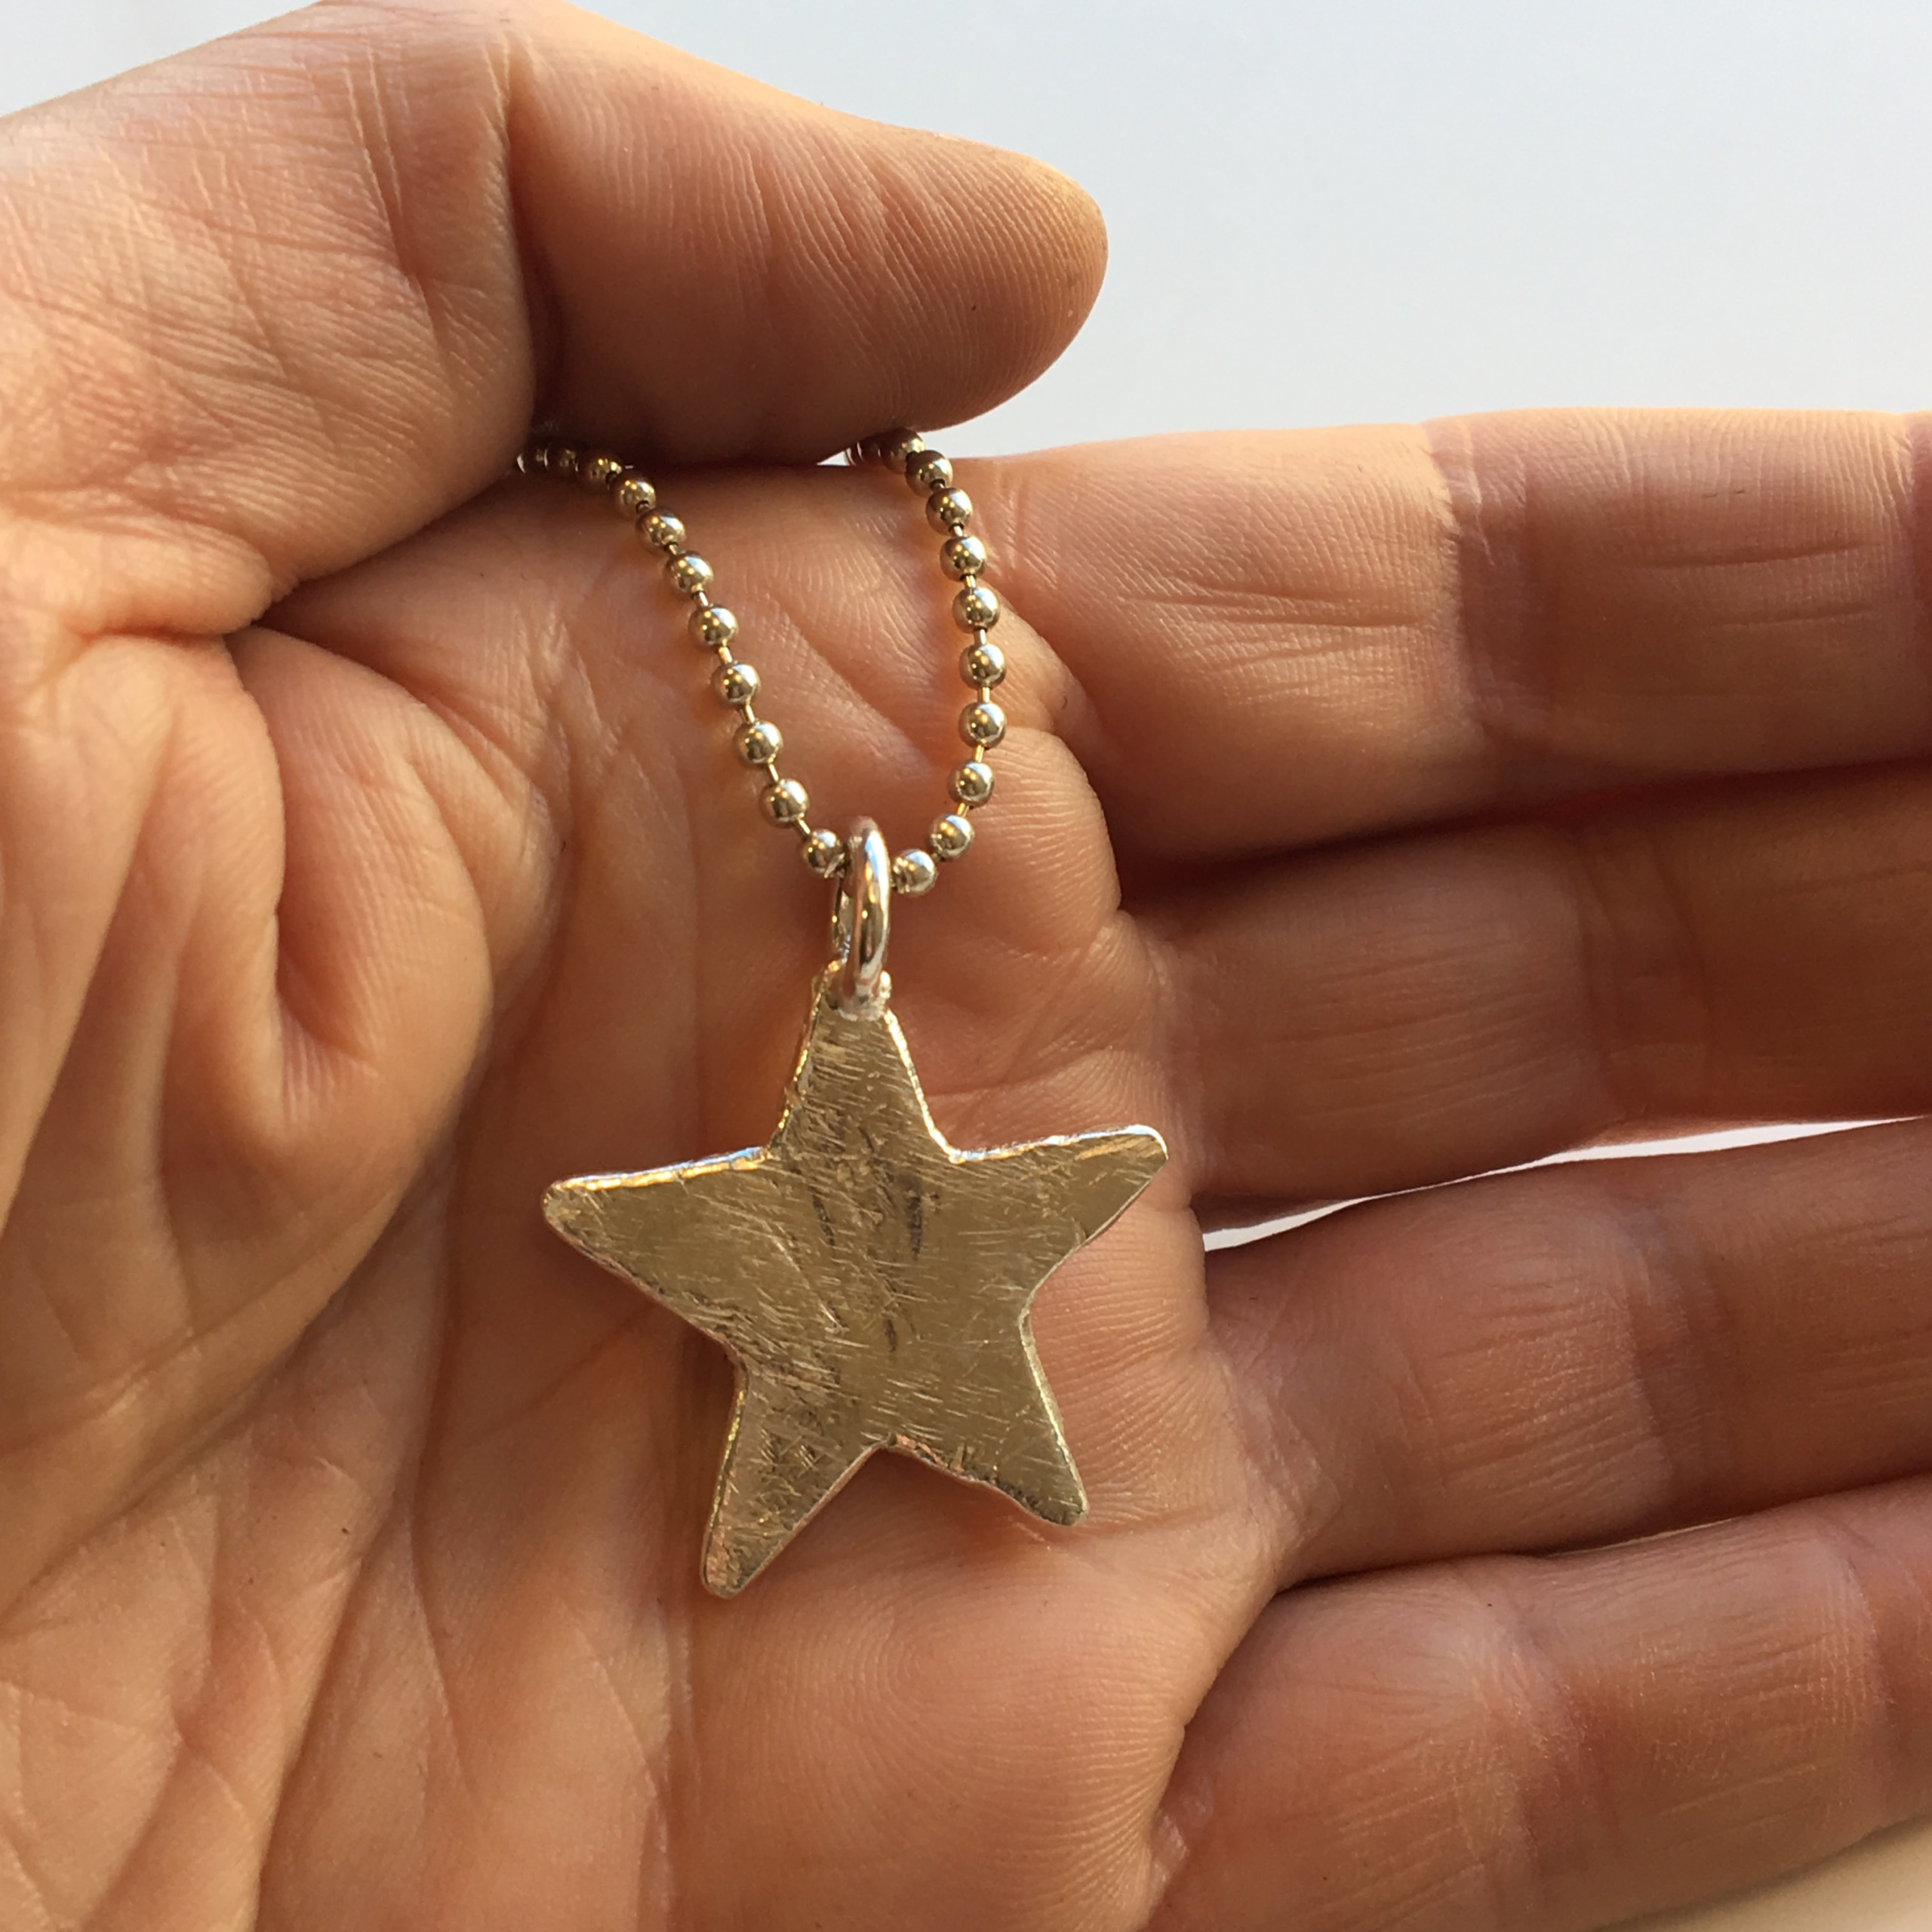 A Solid Silver Star Hand Made To Order Totally Unique